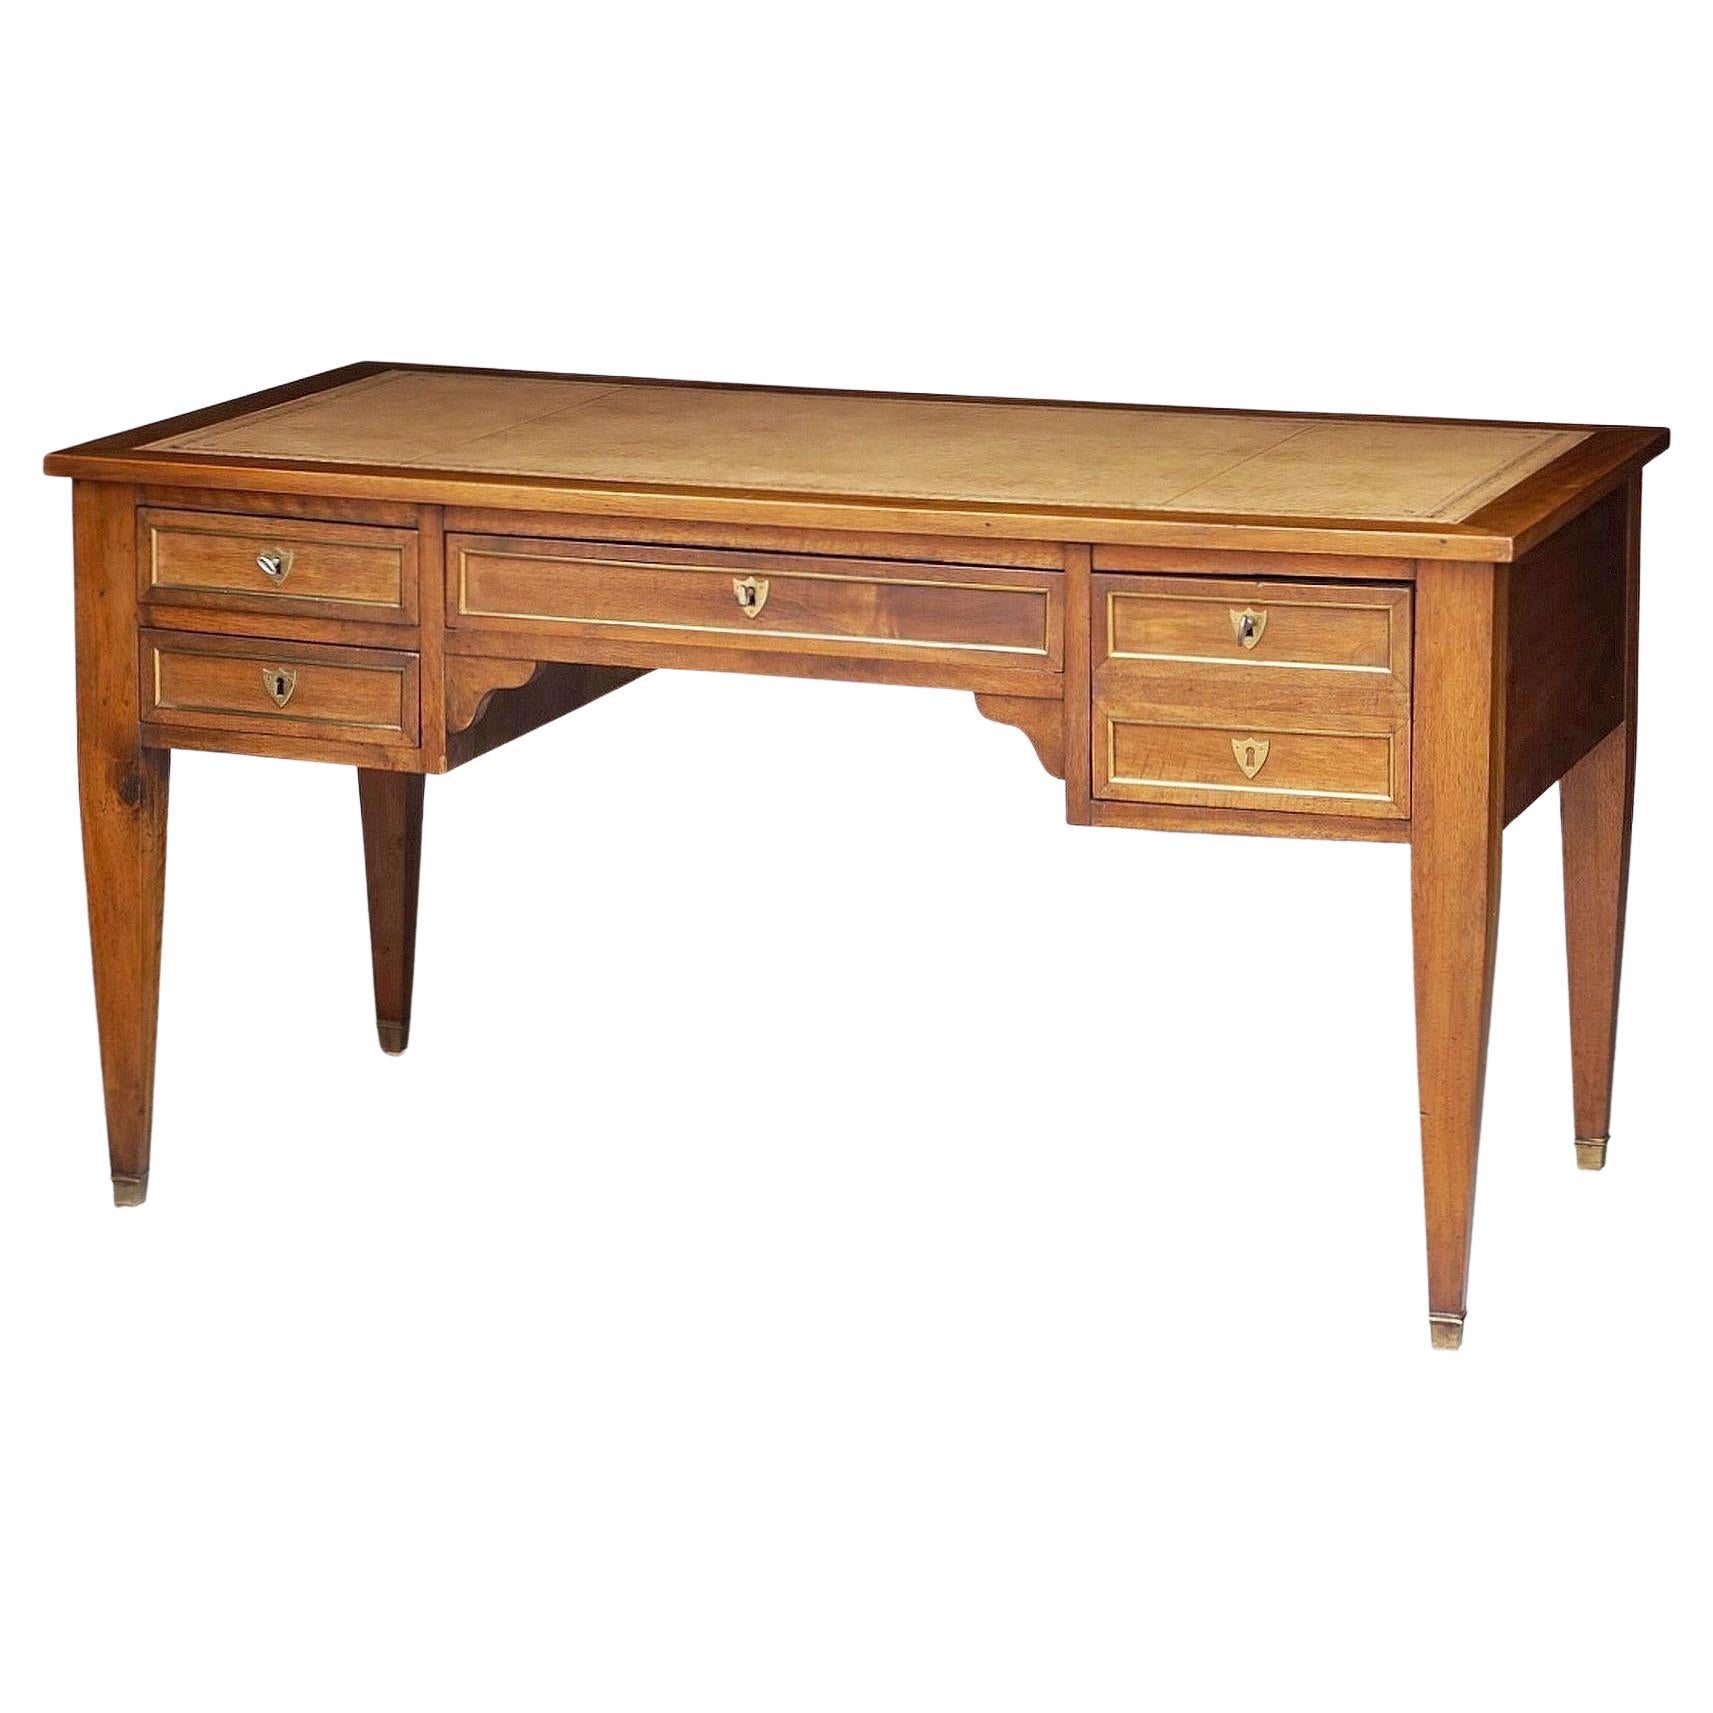 A fine French writing table or desk of walnut and mahogany, featuring an embossed leather top, four drawers with brass escutcheons, and resting on tapering legs with brass caps.